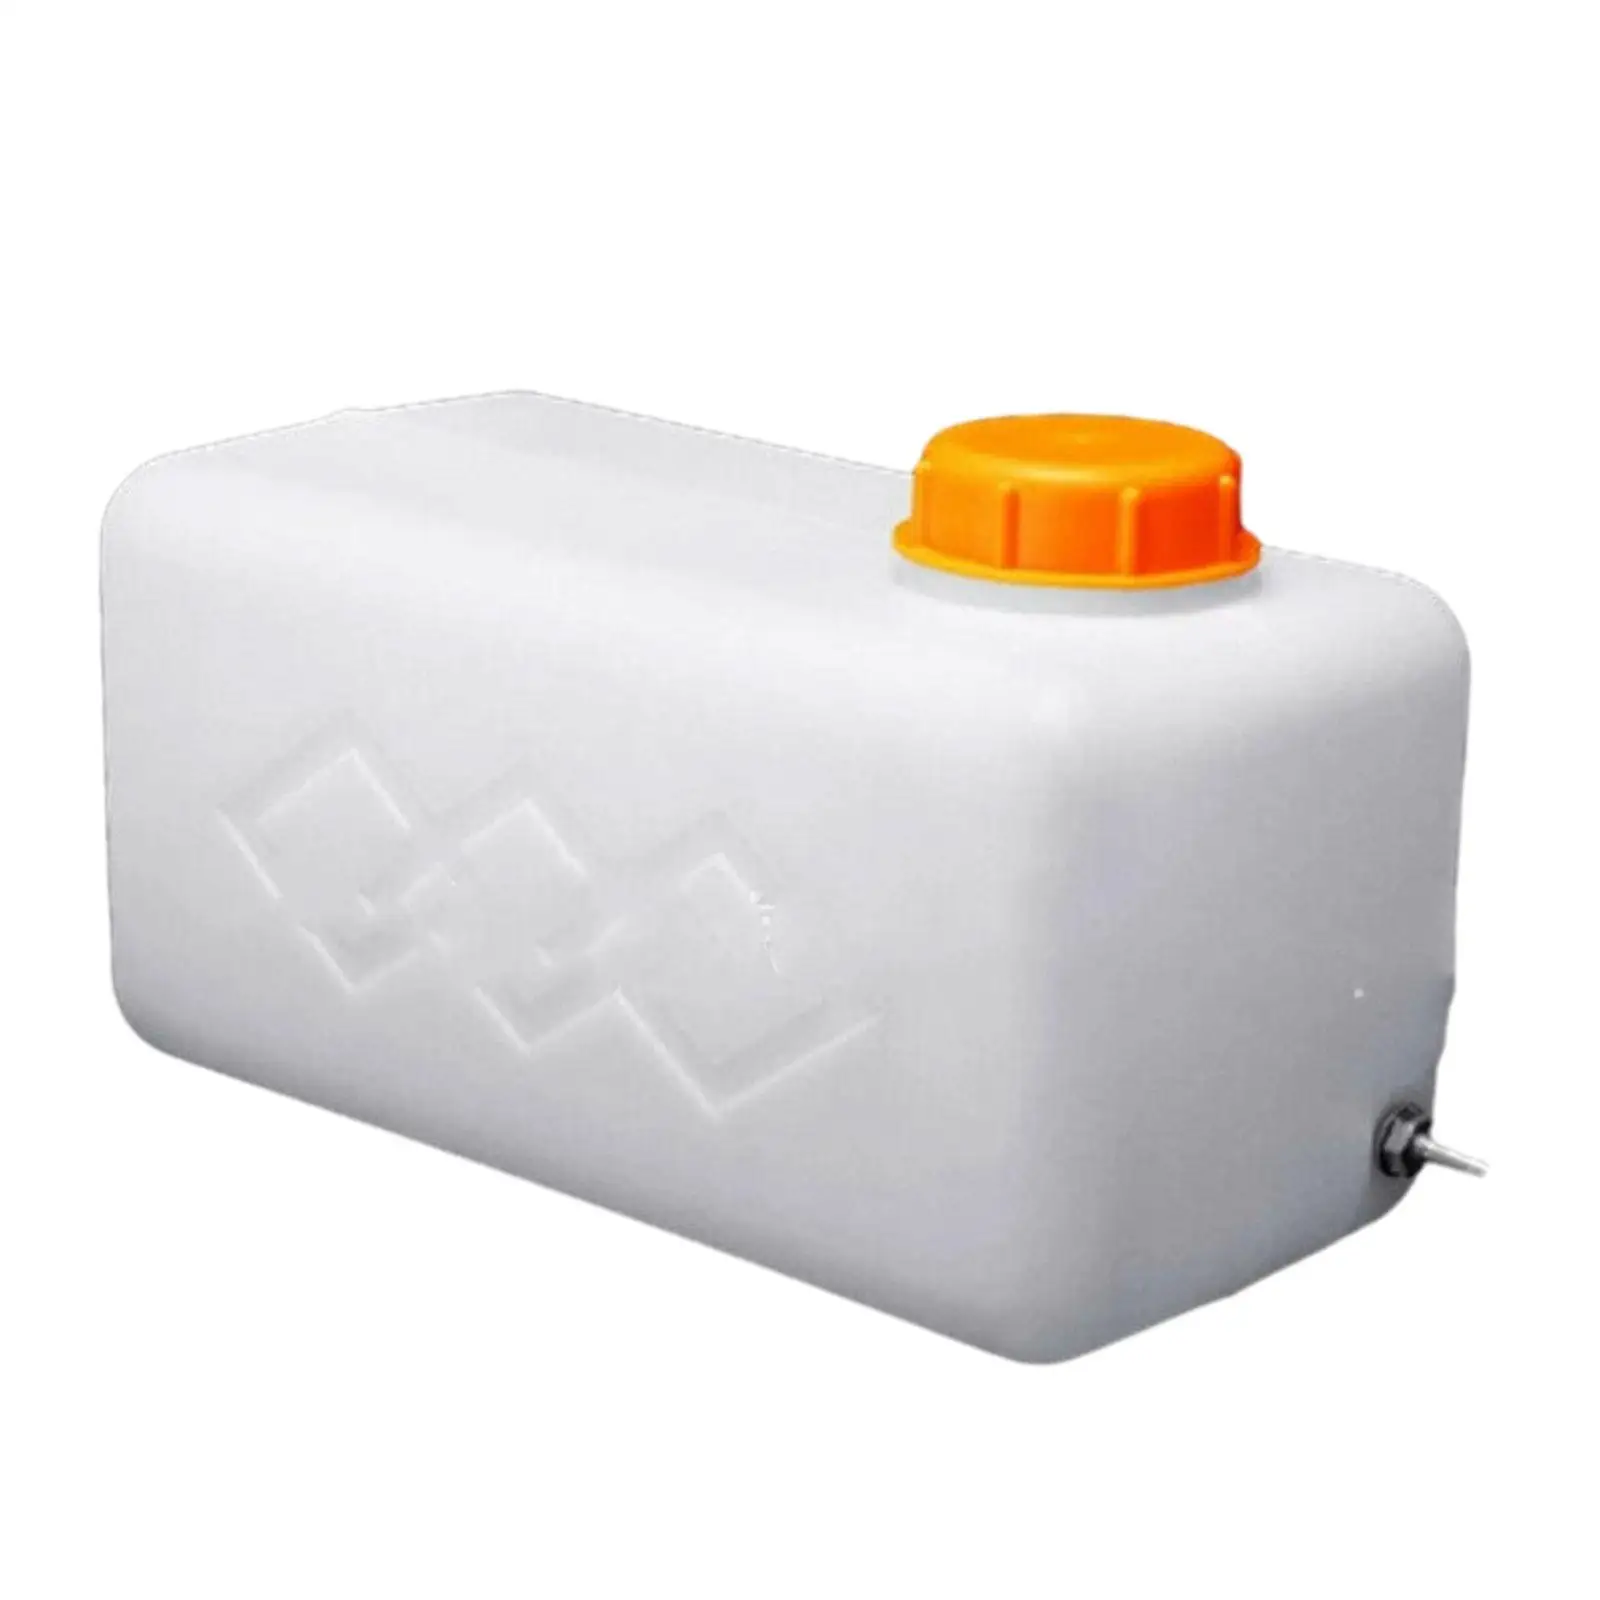 Parking Heater 5L Easy Installation Large Capacity Car Truck Fuel Tank for Ship Boat Air Parking Heater Auto Accessories